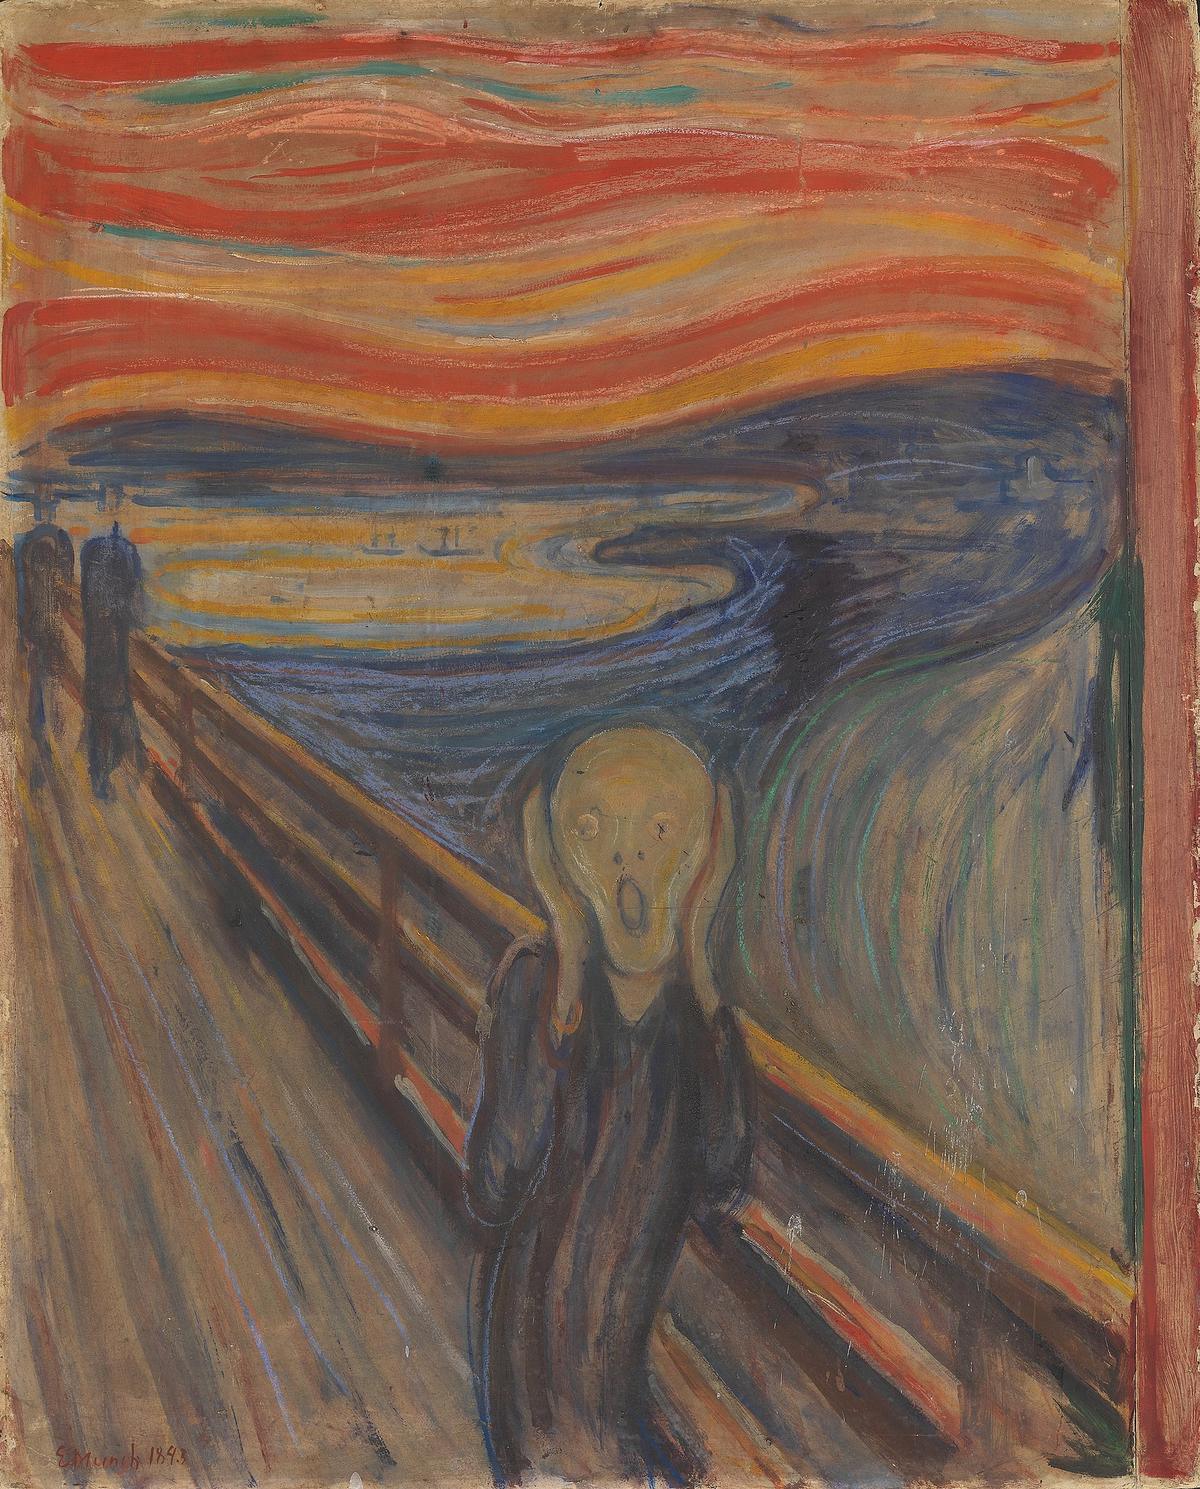 'The Scream of Nature' by Edvard Munch, 1893.